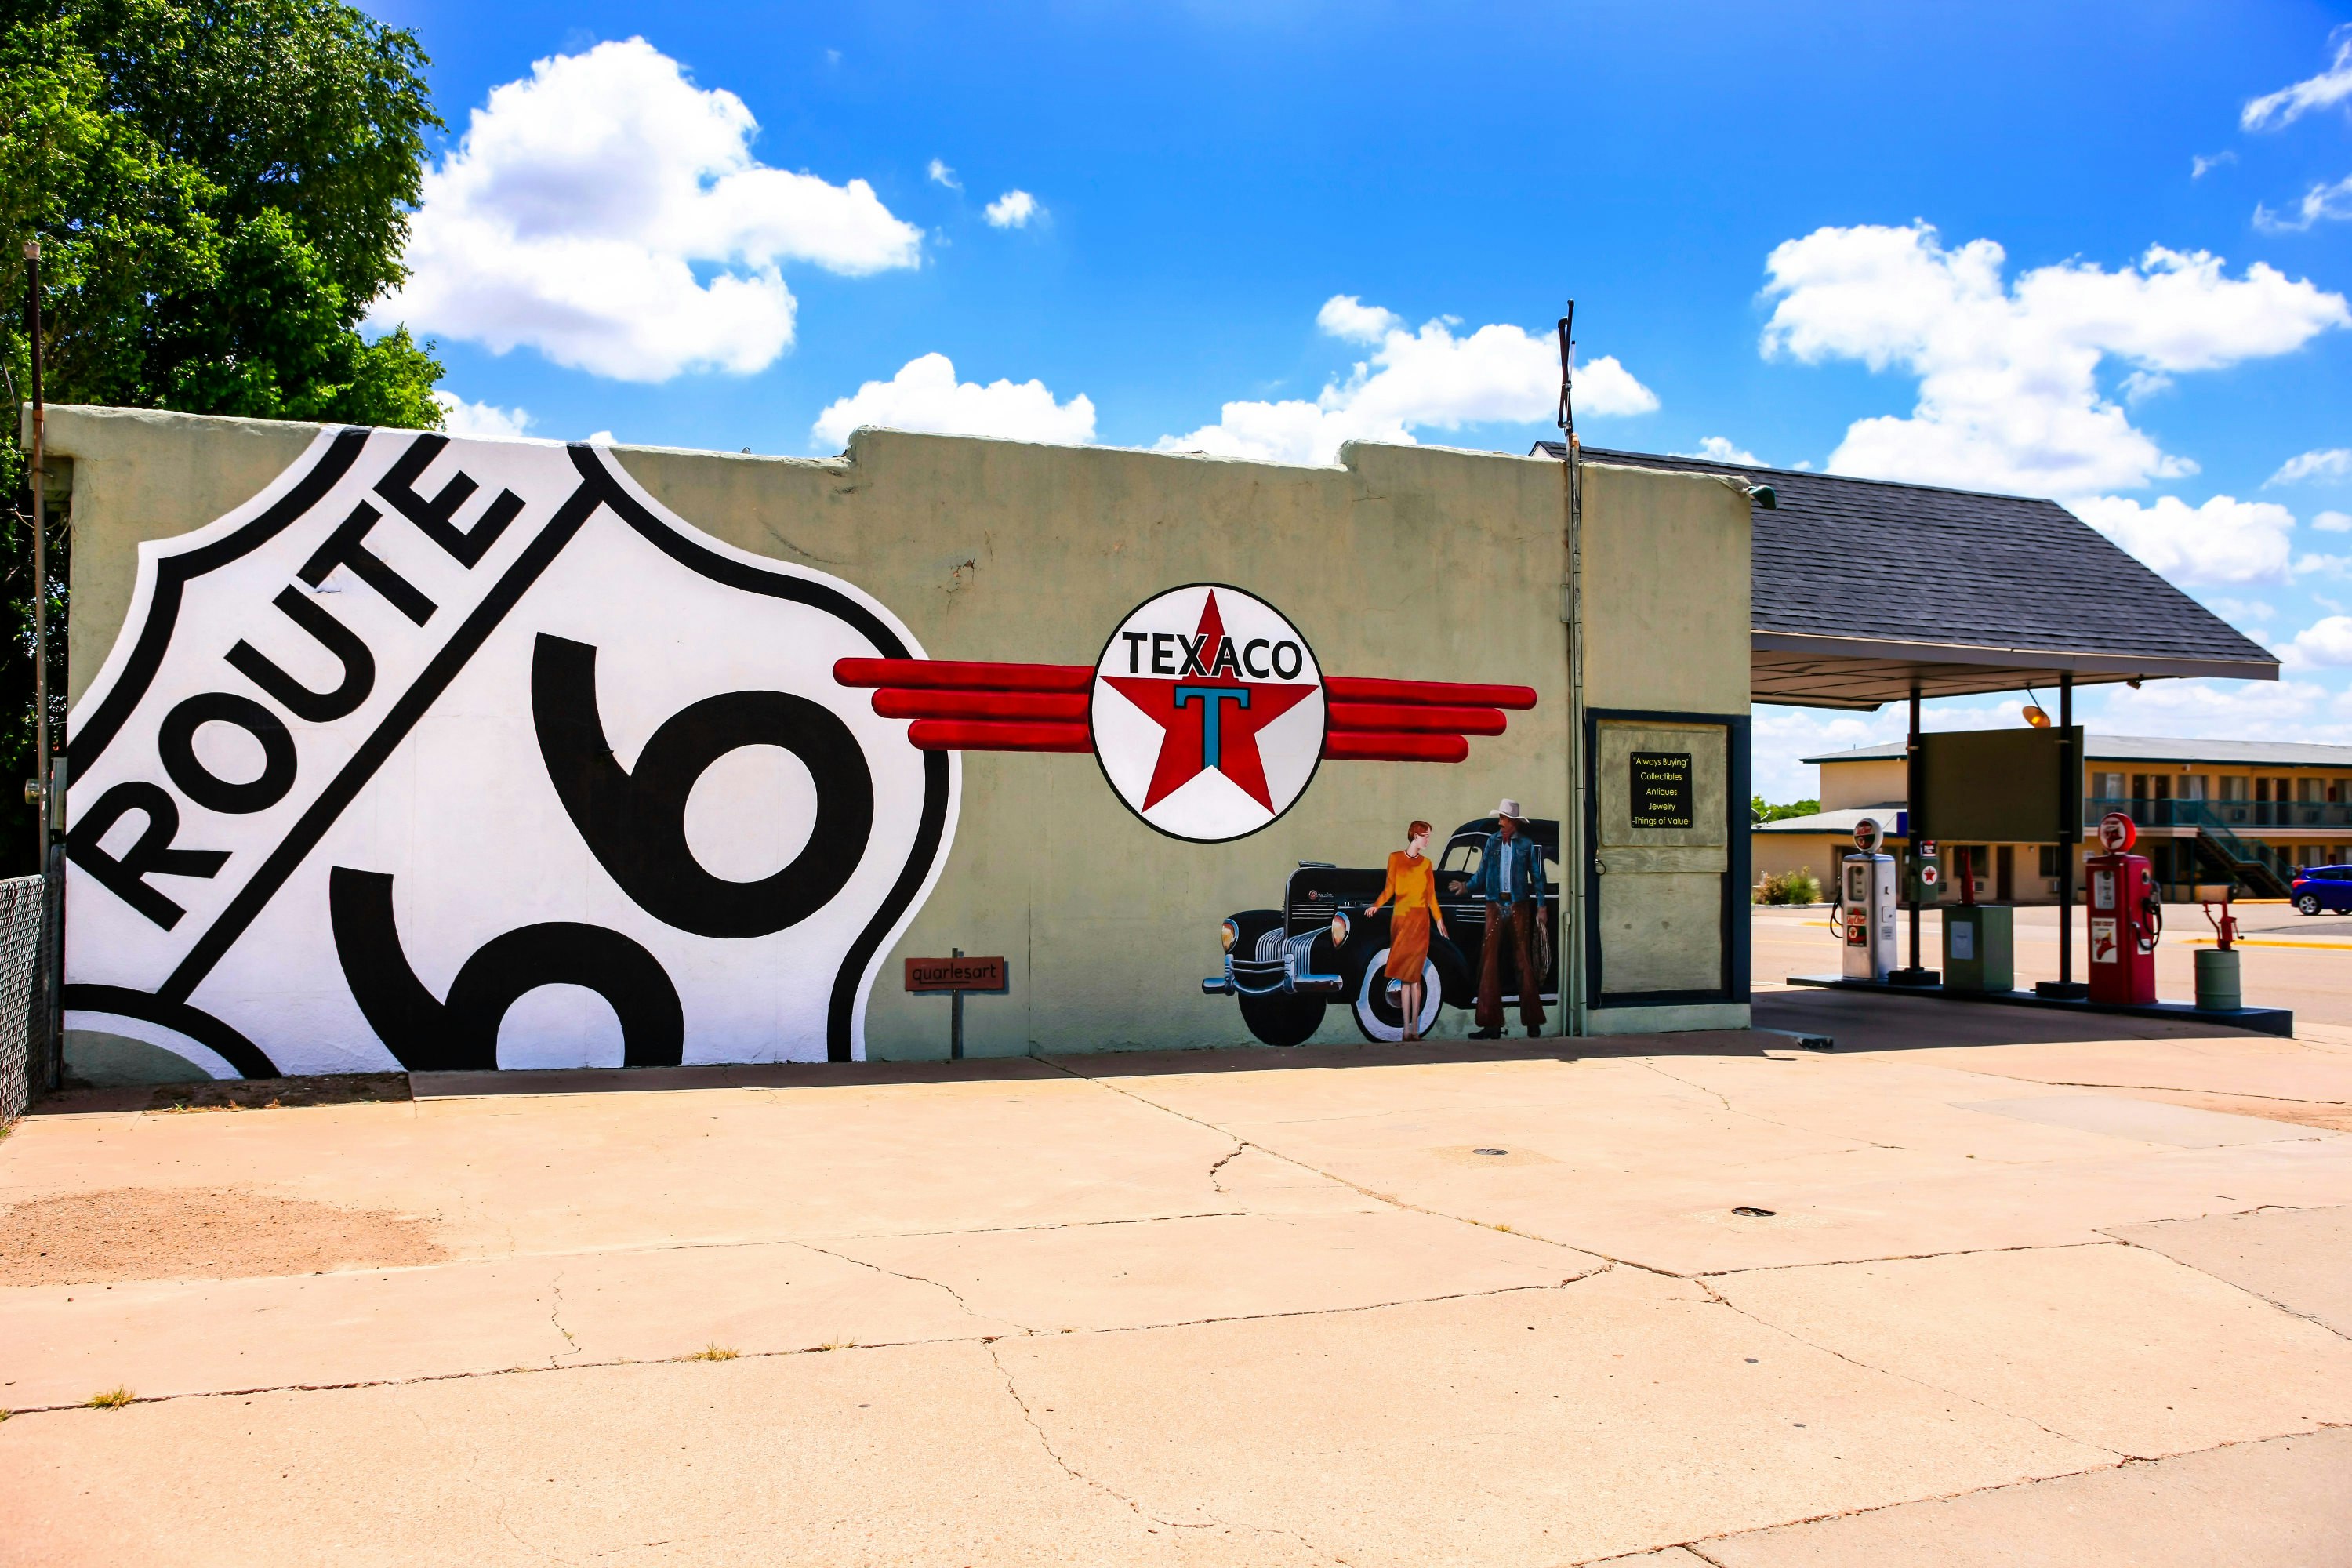 Travel News - route 66